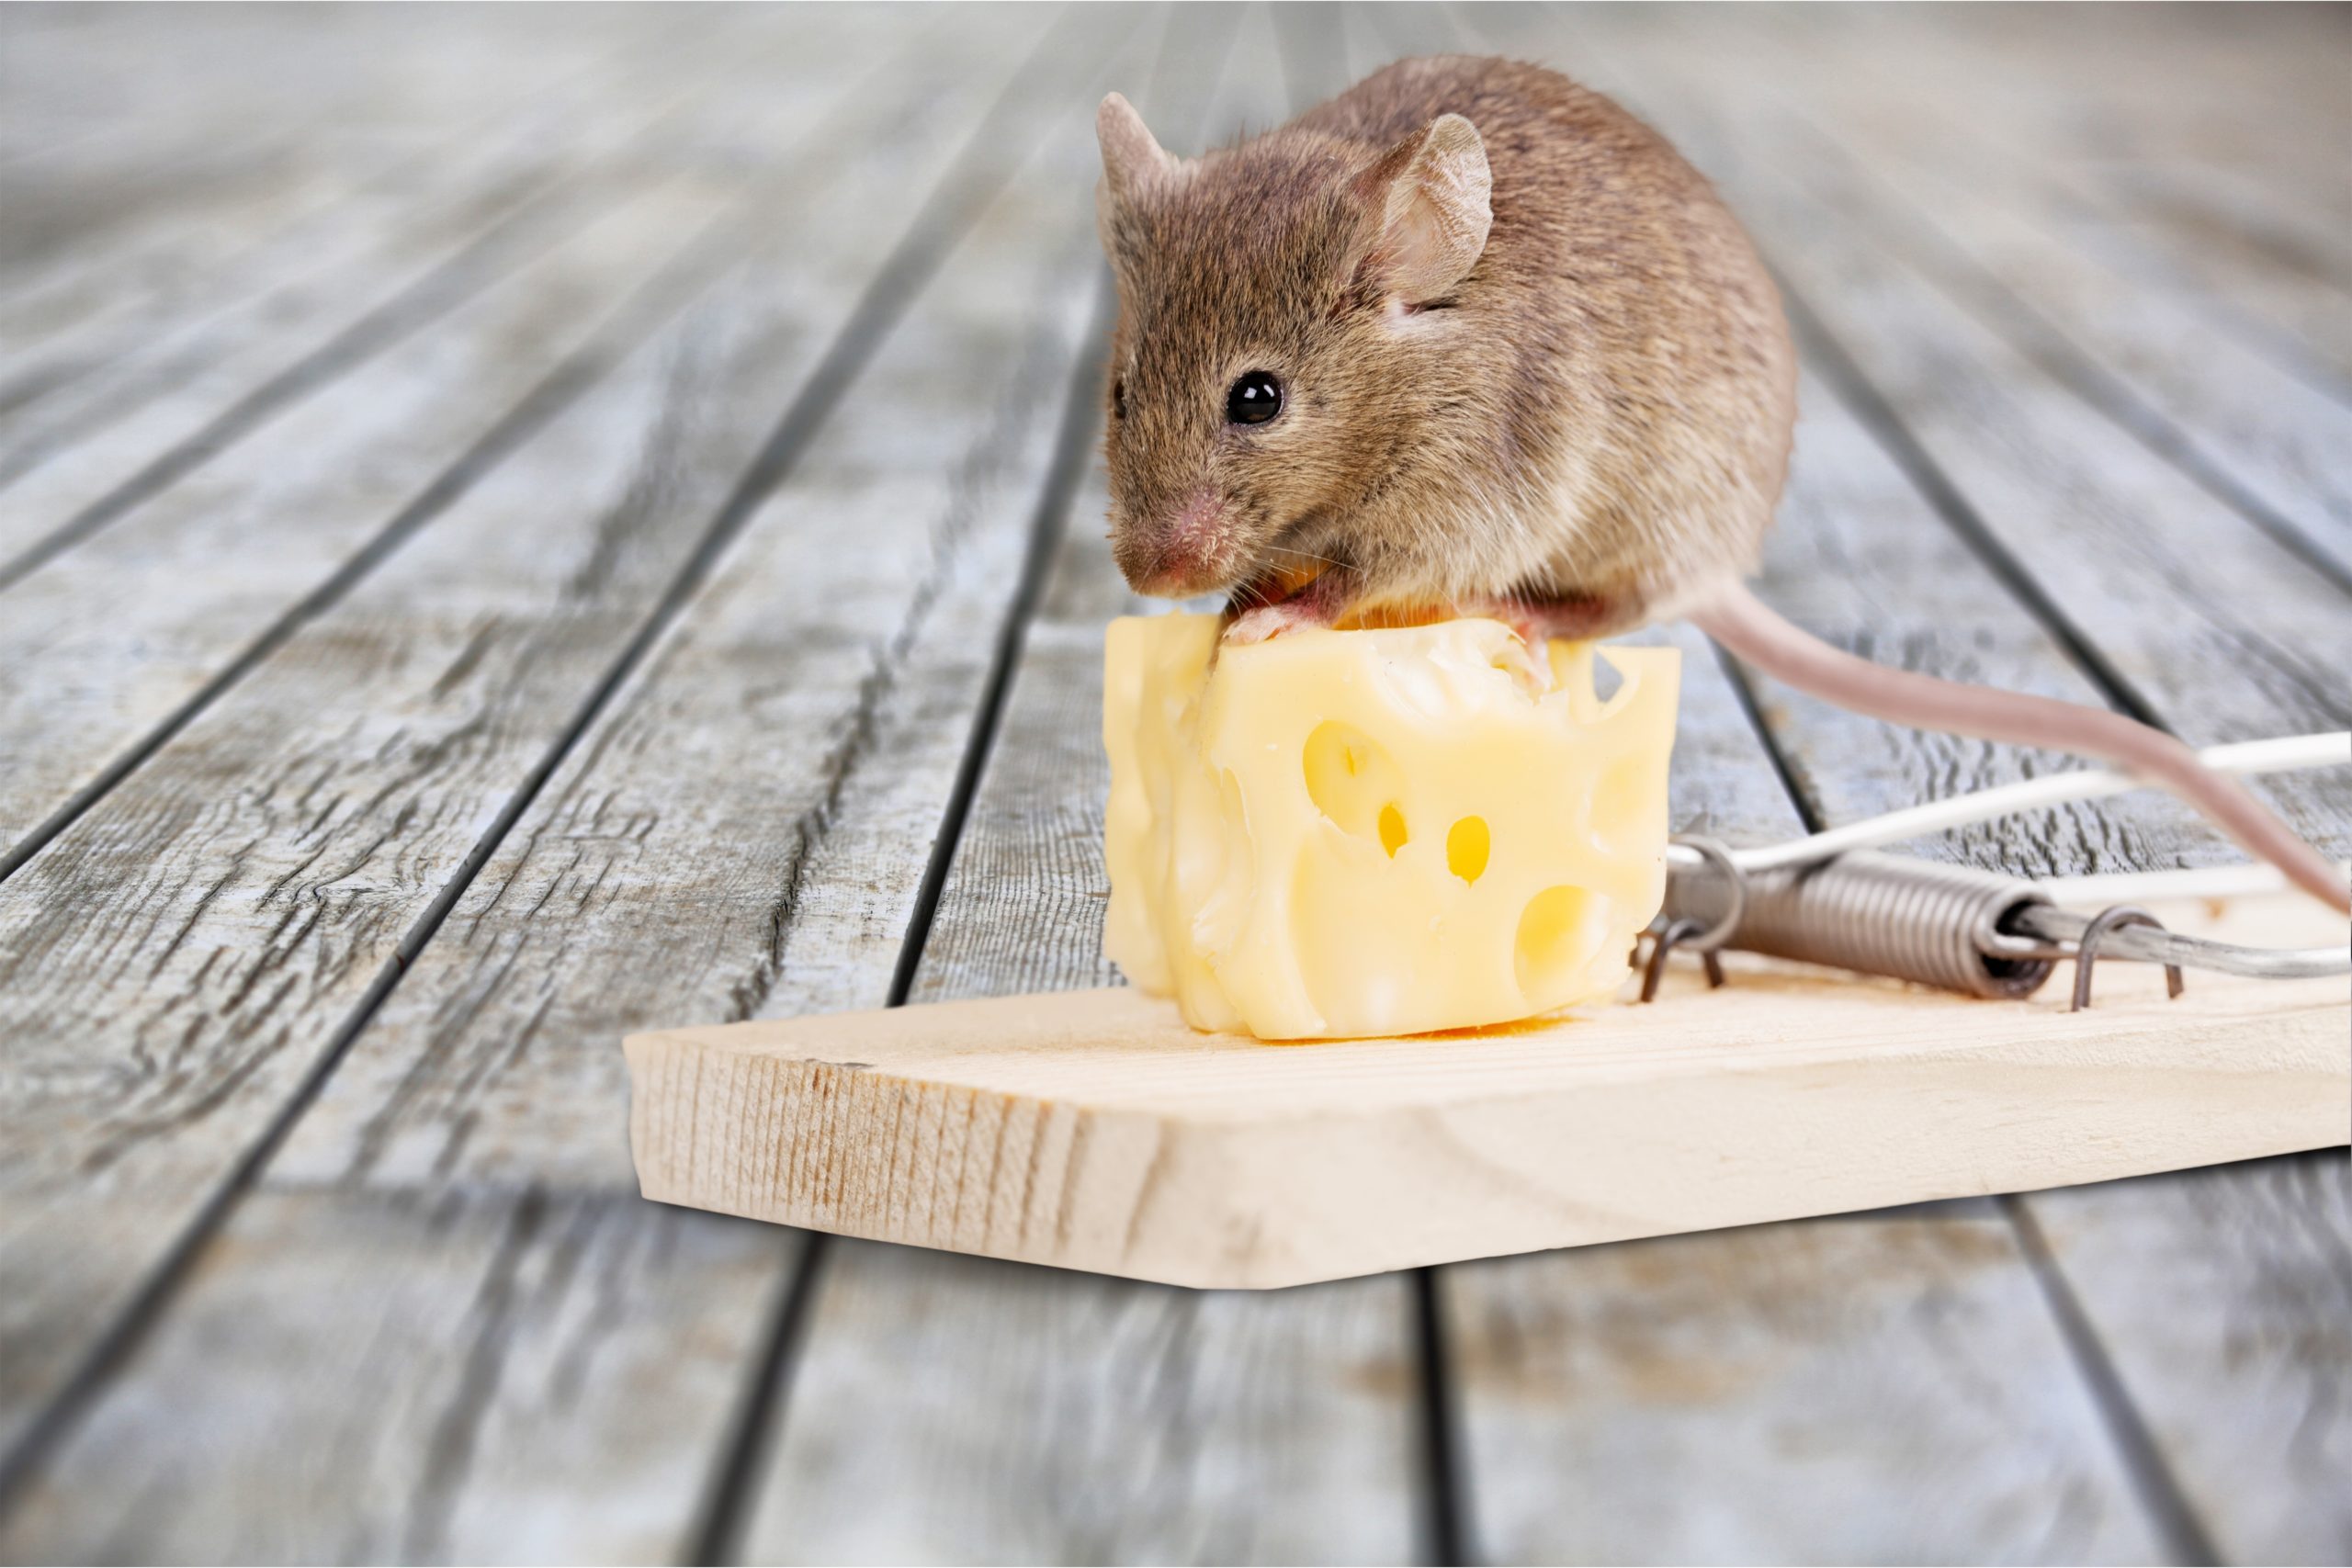 https://www.batzner.com/wp-content/uploads/2020/01/mousetrap_cheese-scaled.jpg